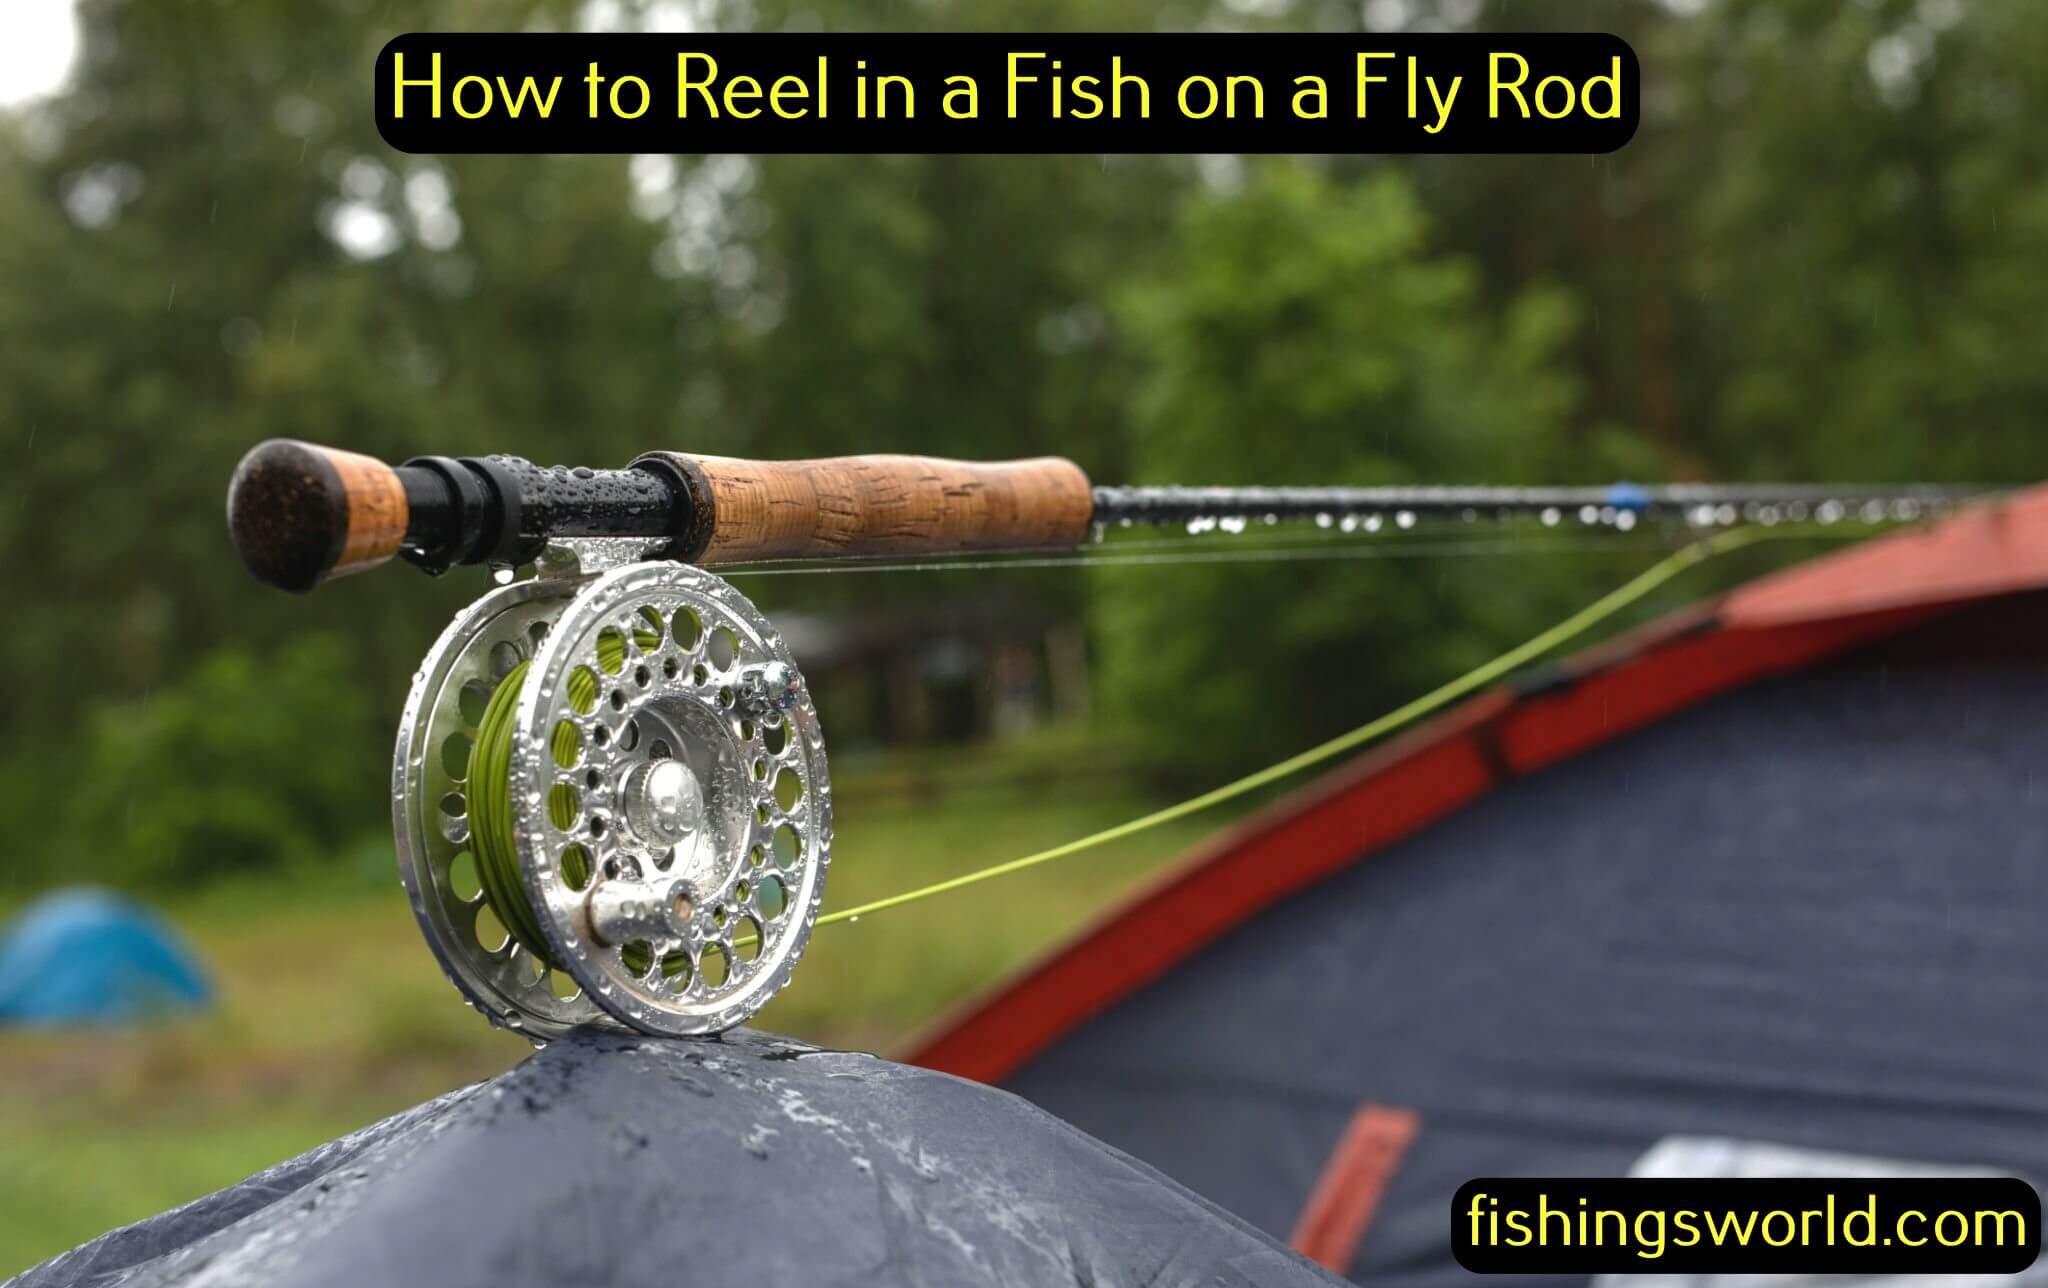 Reel in a Fish on a Fly Rod